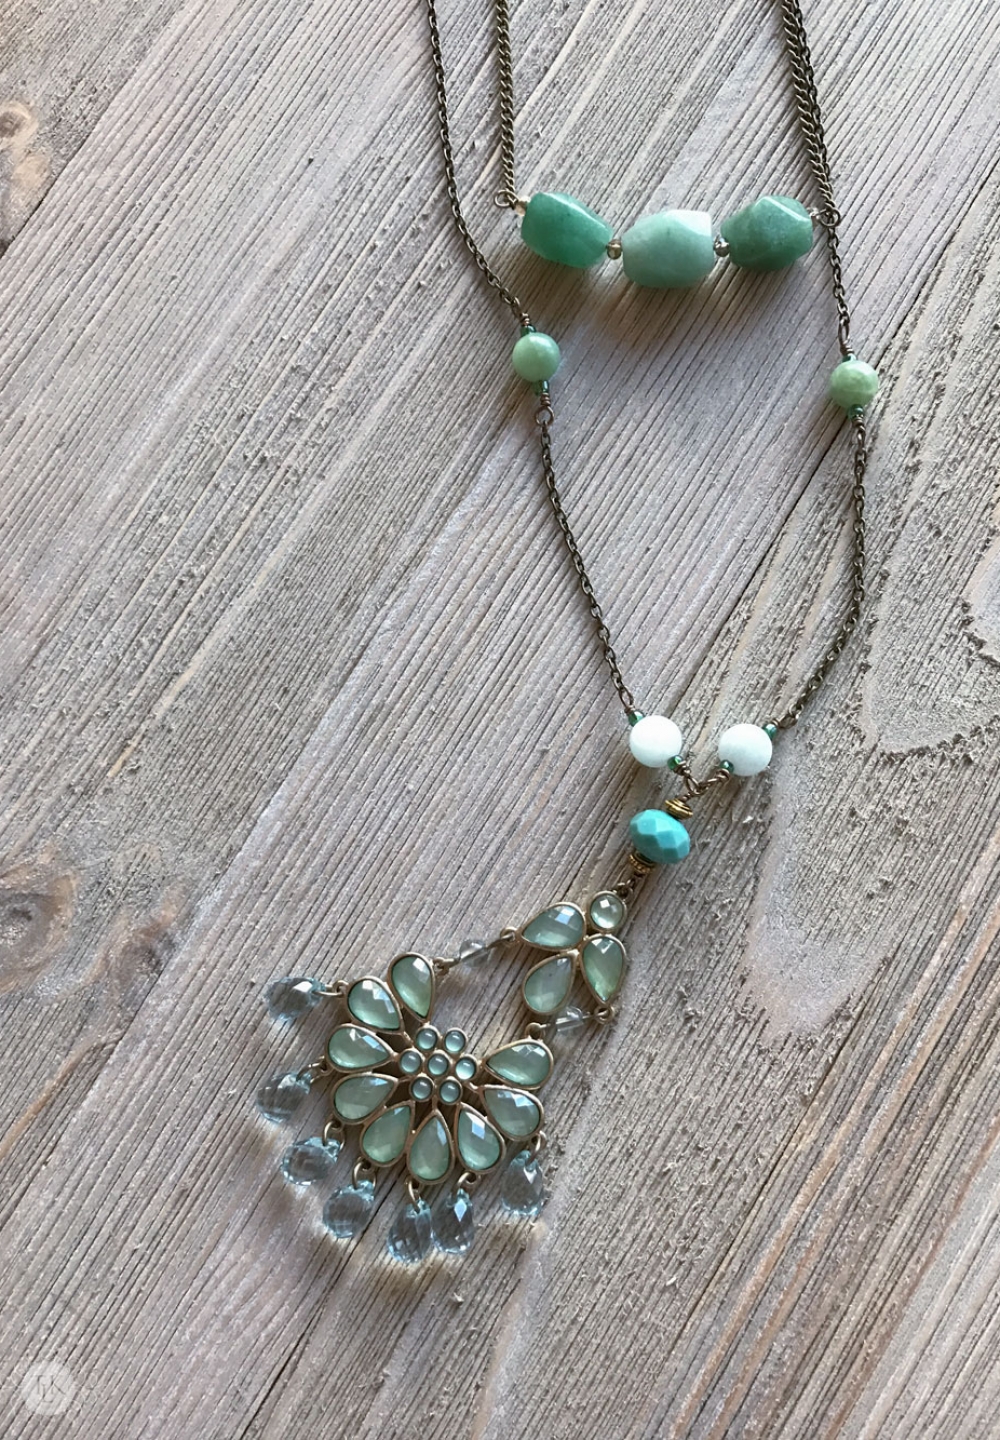 THREE LITTLE KITTENS | 3708n Amazonite and Costume Jewelry Pendant Necklace with 3706n Amazonite Faceted Nugget Bar Necklace